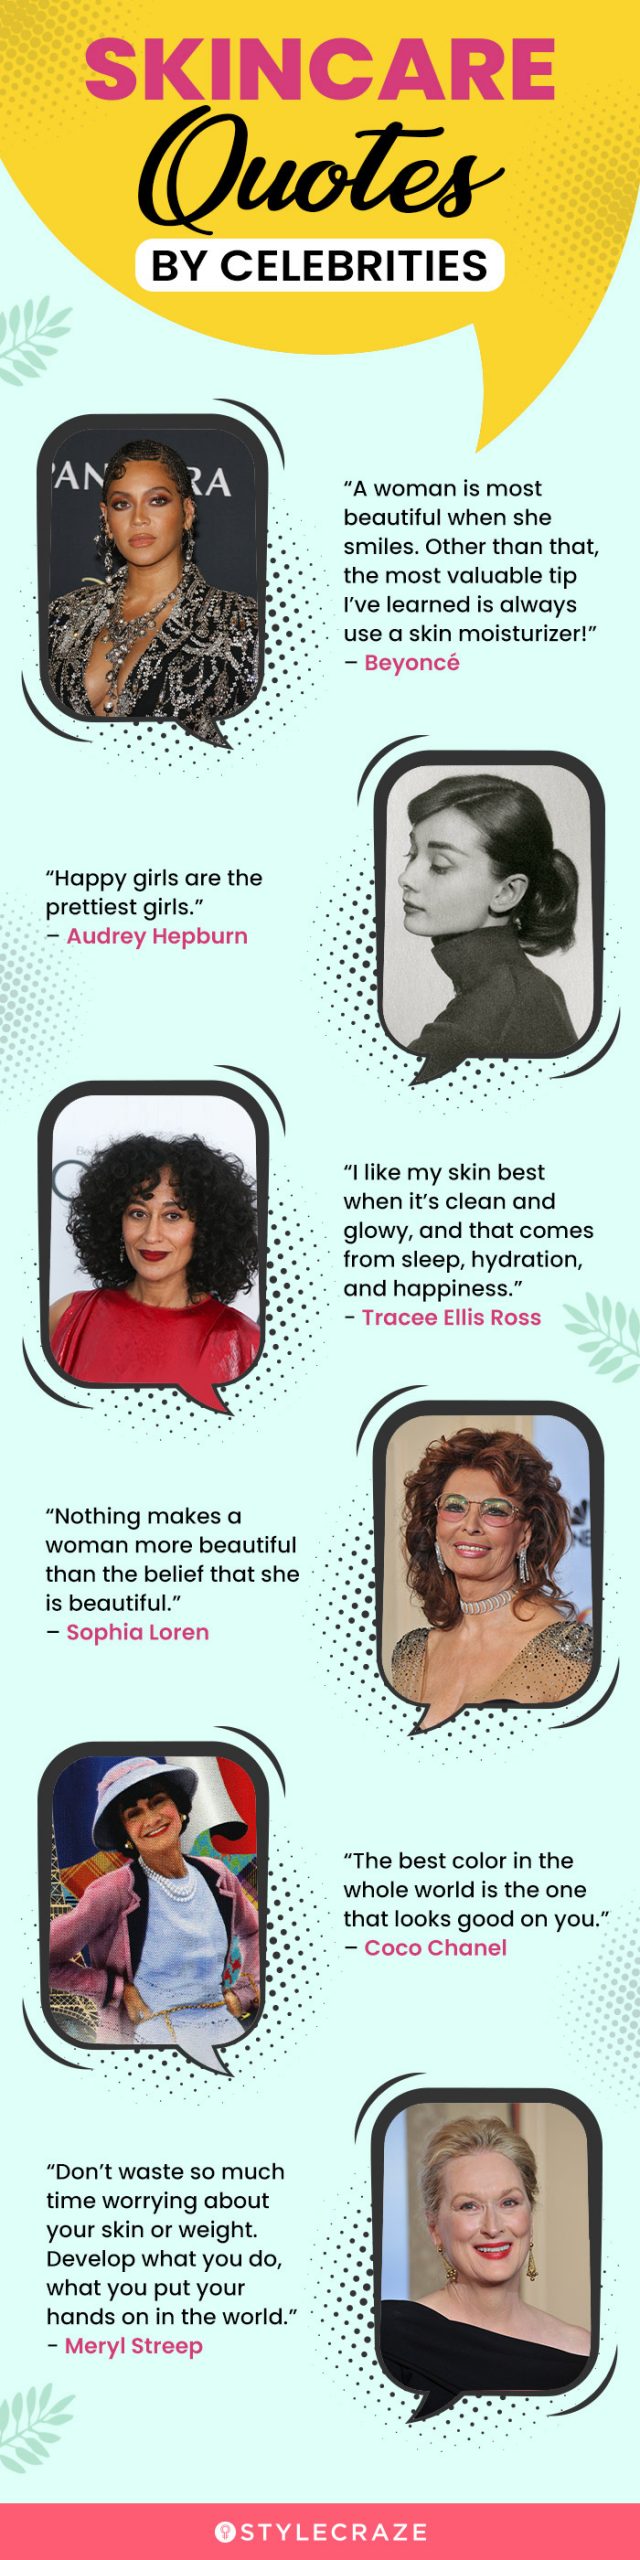 skincare quotes by celebrities [infographic]